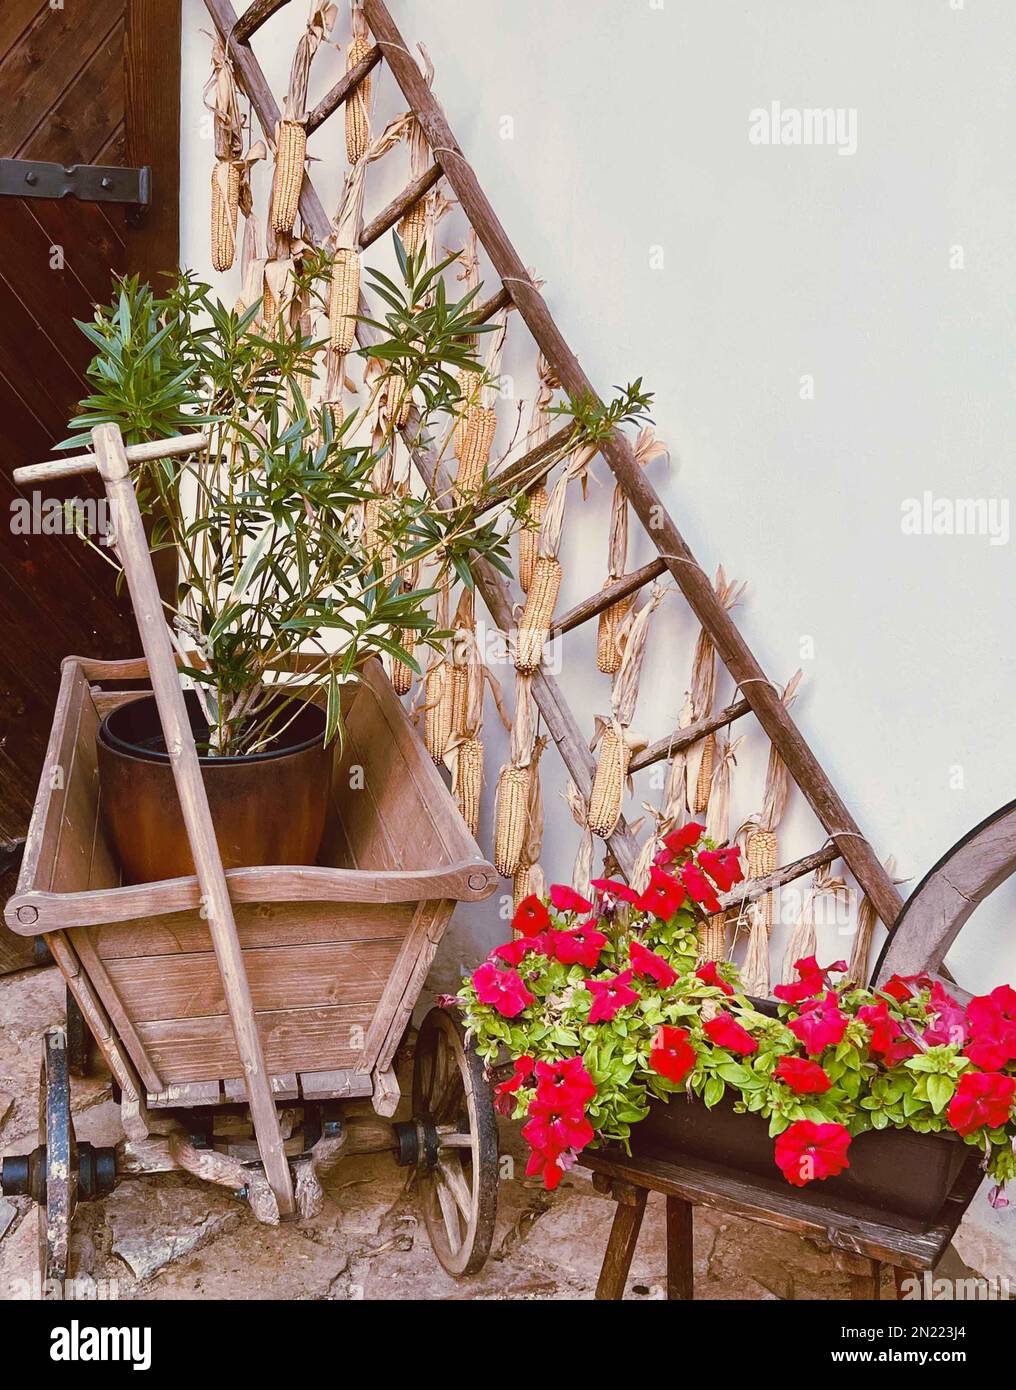 Here is text space with country garden tools and red petunias with old wood cart next to ladder. Stock Photo